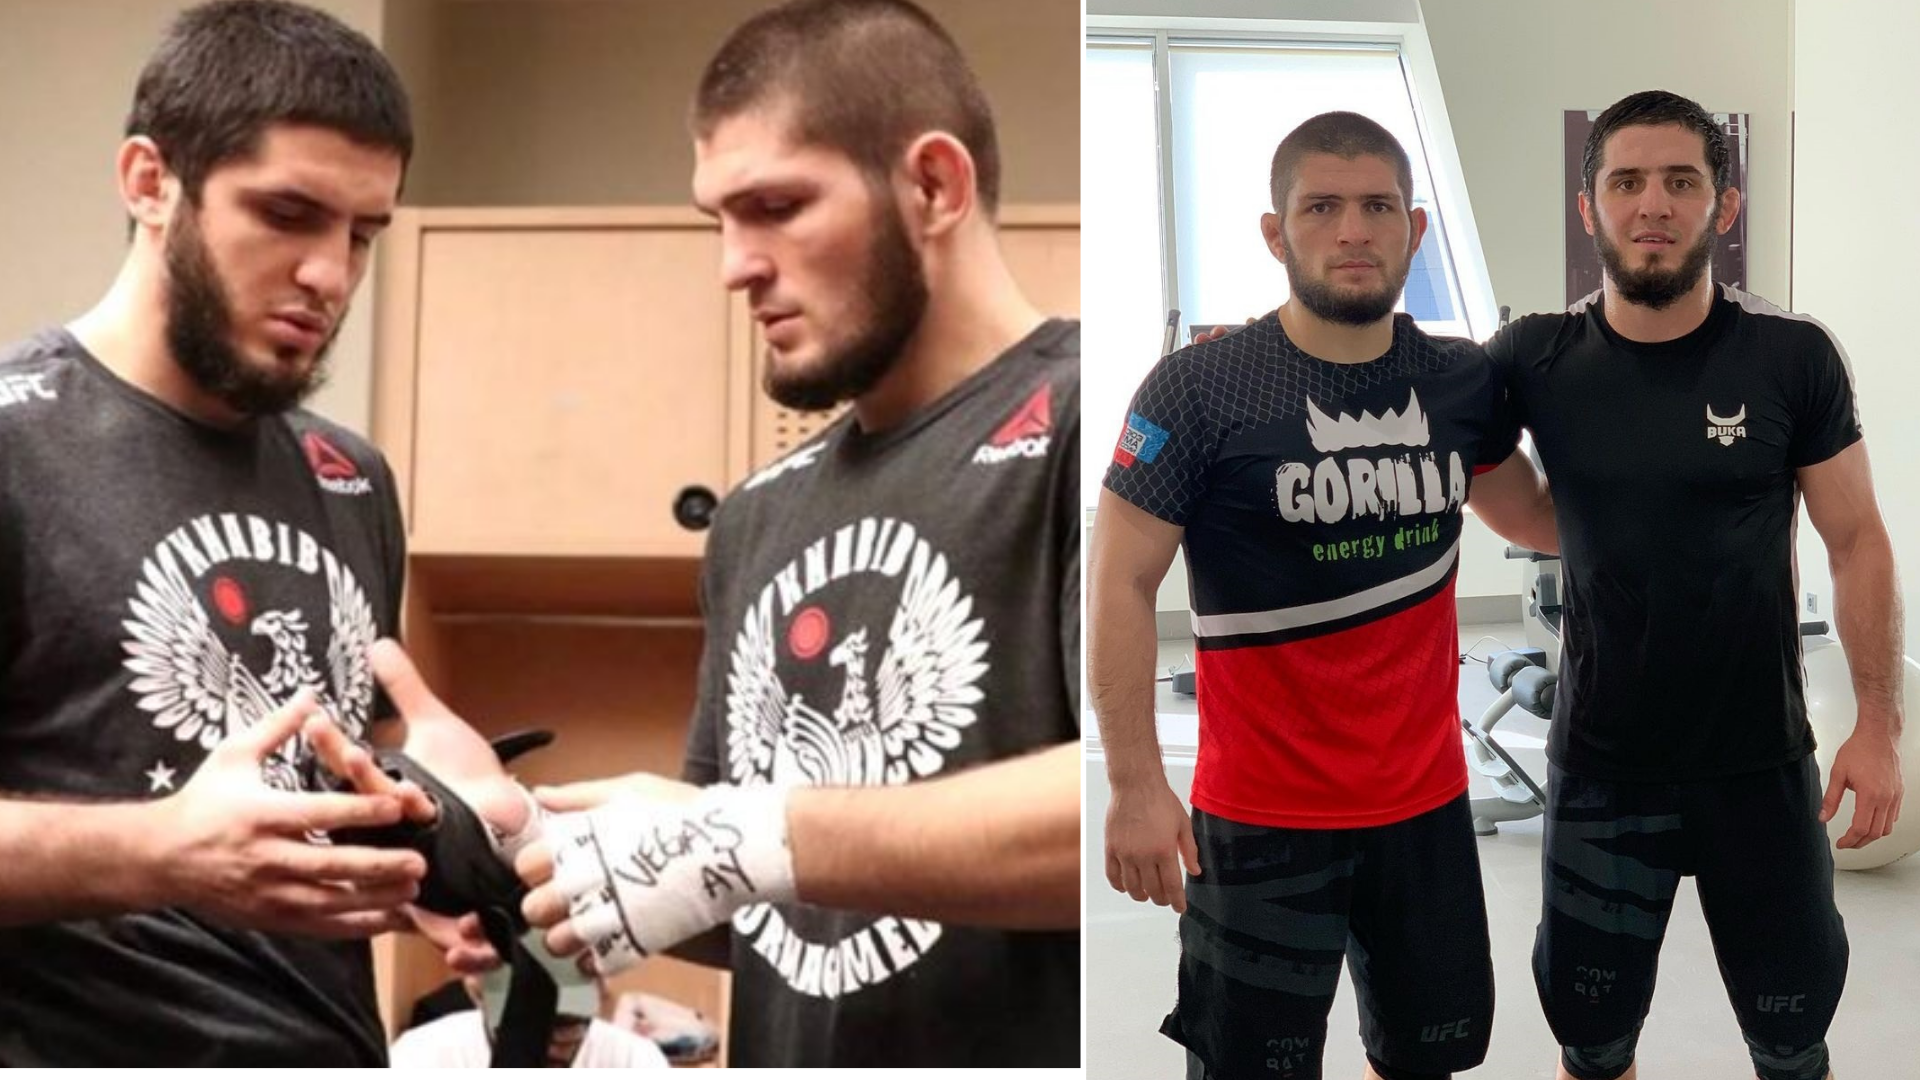 Mendez named a fighter capable of defeating Nurmagomedov